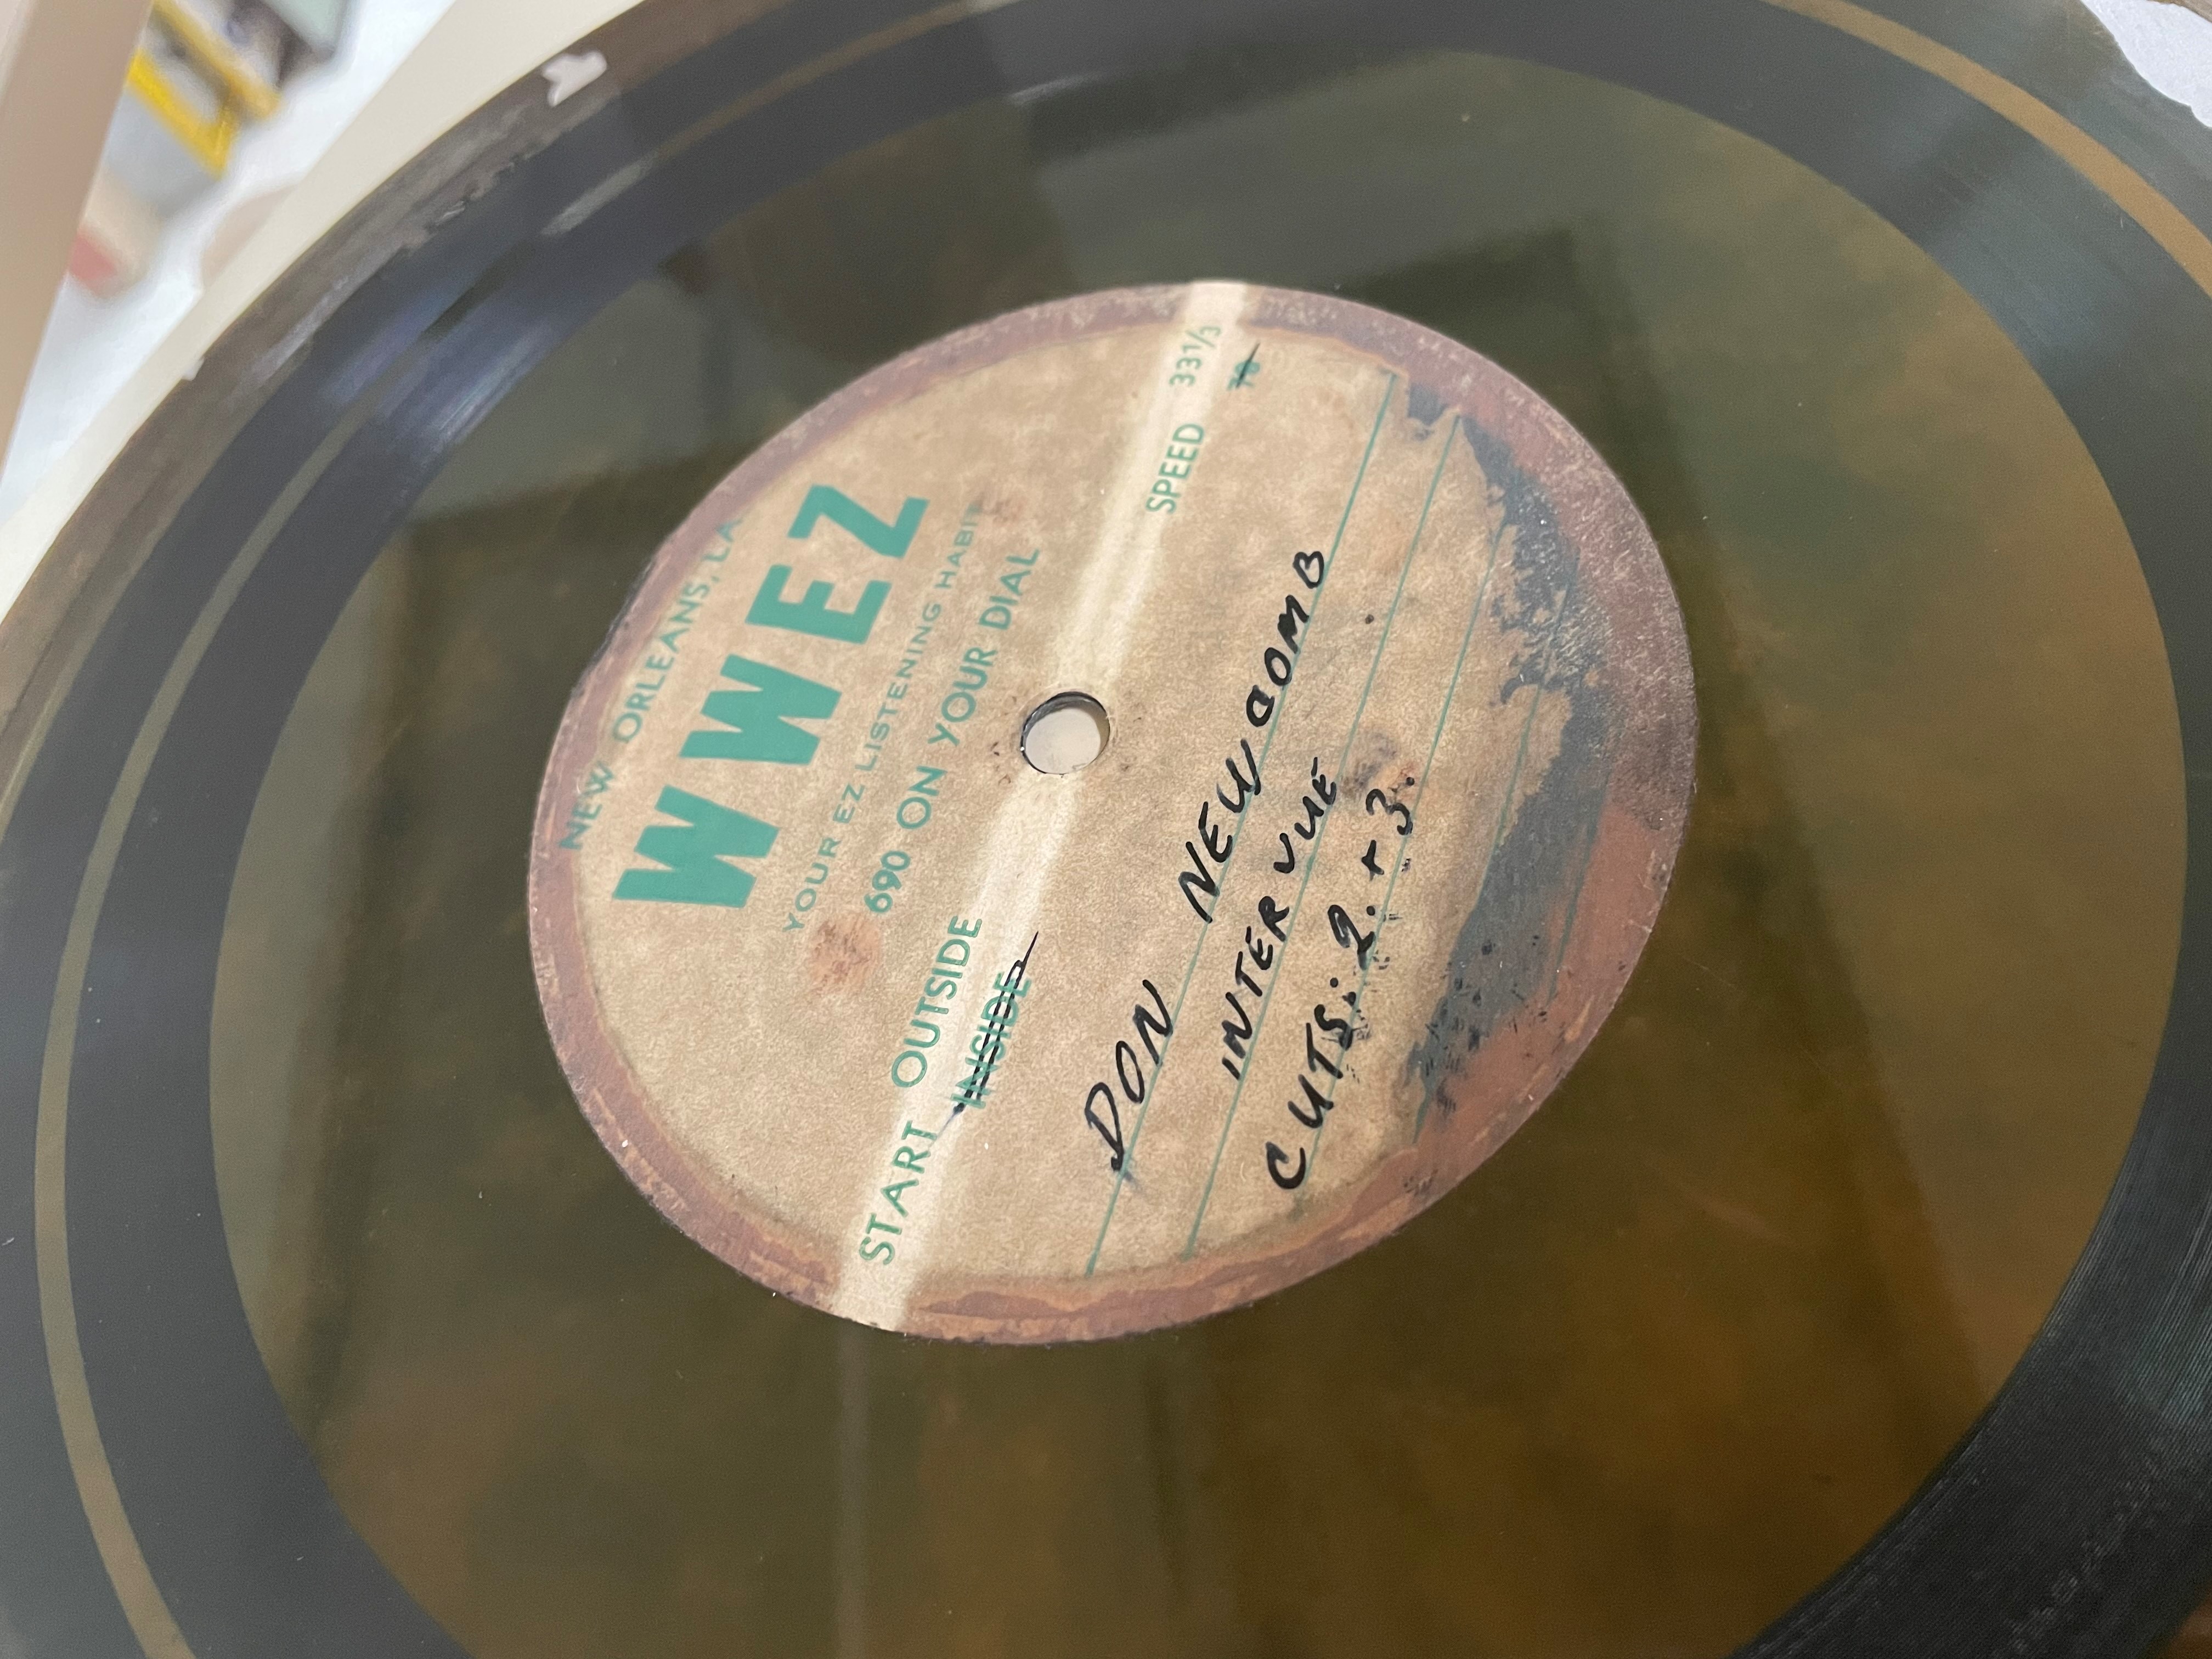 Side A of a 10-inch acetate featuring Dr. Daddy-O interviewing professional baseball pitcher Don Newcombe at Pelican Stadium, circa 1950s, Vernon “Dr. Daddy-O” Winslow collection HJA-055, Box 80, Tulane University Special Collections, New Orleans, LA. 